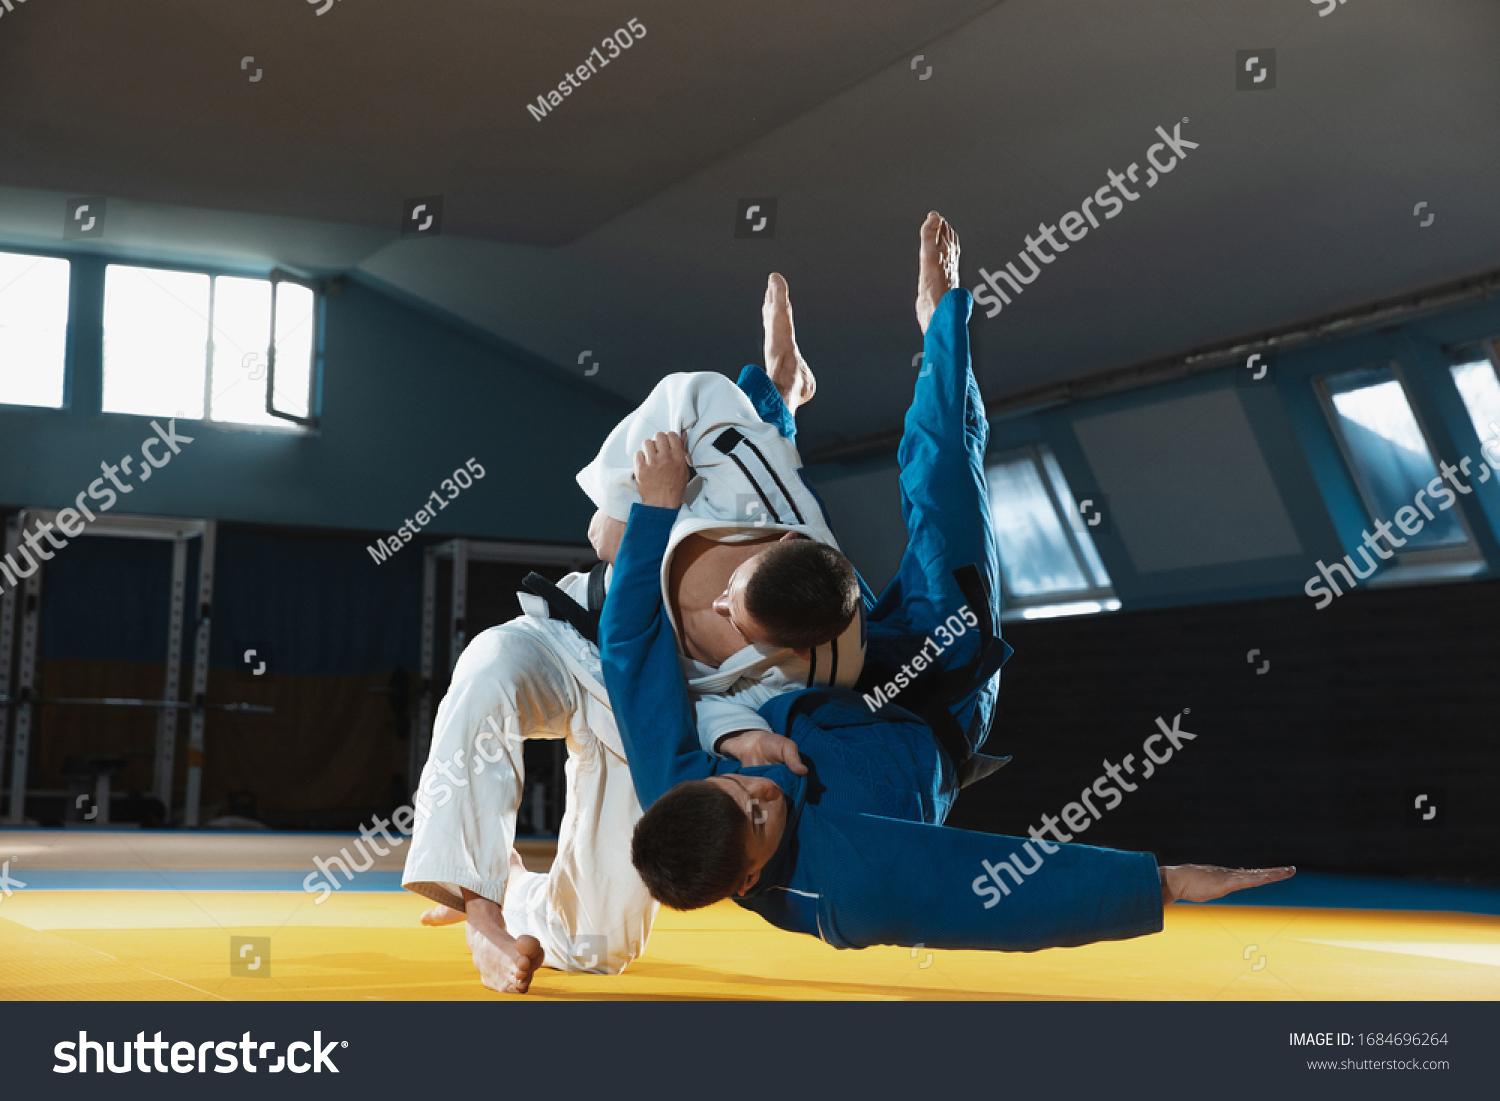 Two young judo caucasian fighters in white and blue kimono with black belts training martial arts in the gym with expression, in action, motion. Practicing fighting skills. Overcoming, reaching target #1684696264